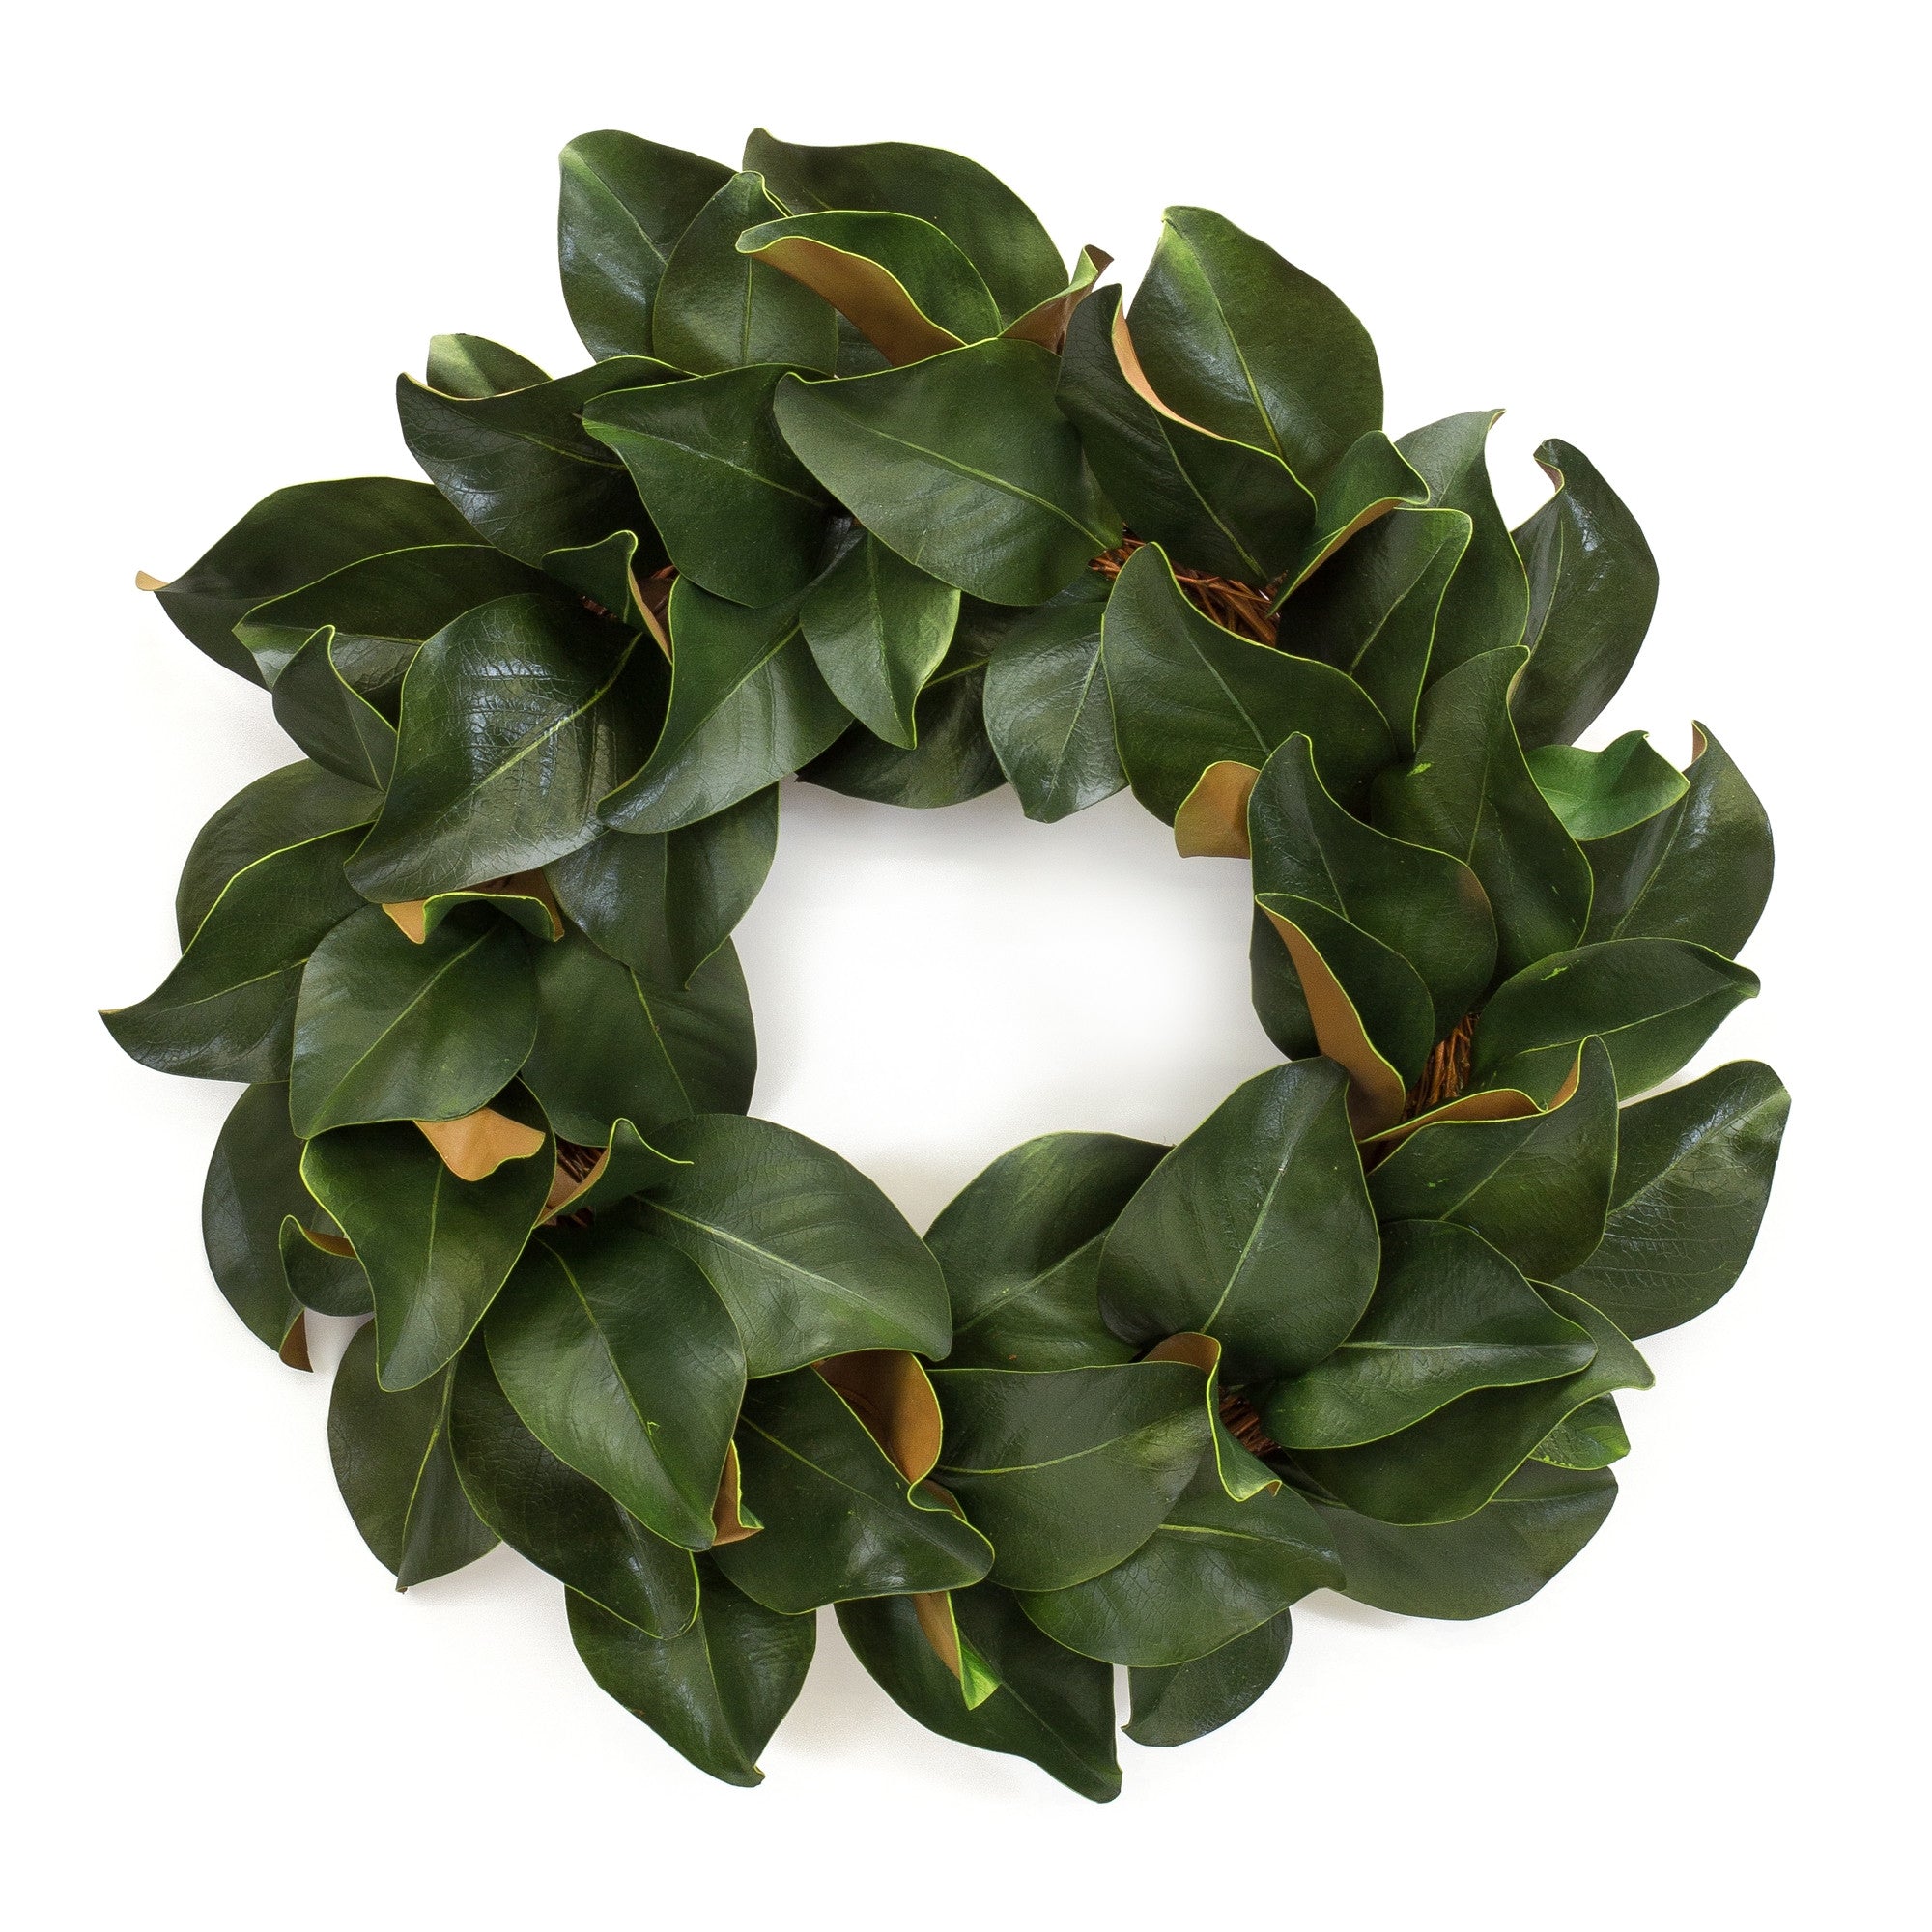 24" Green and Brown Artificial Magnolia Wreath